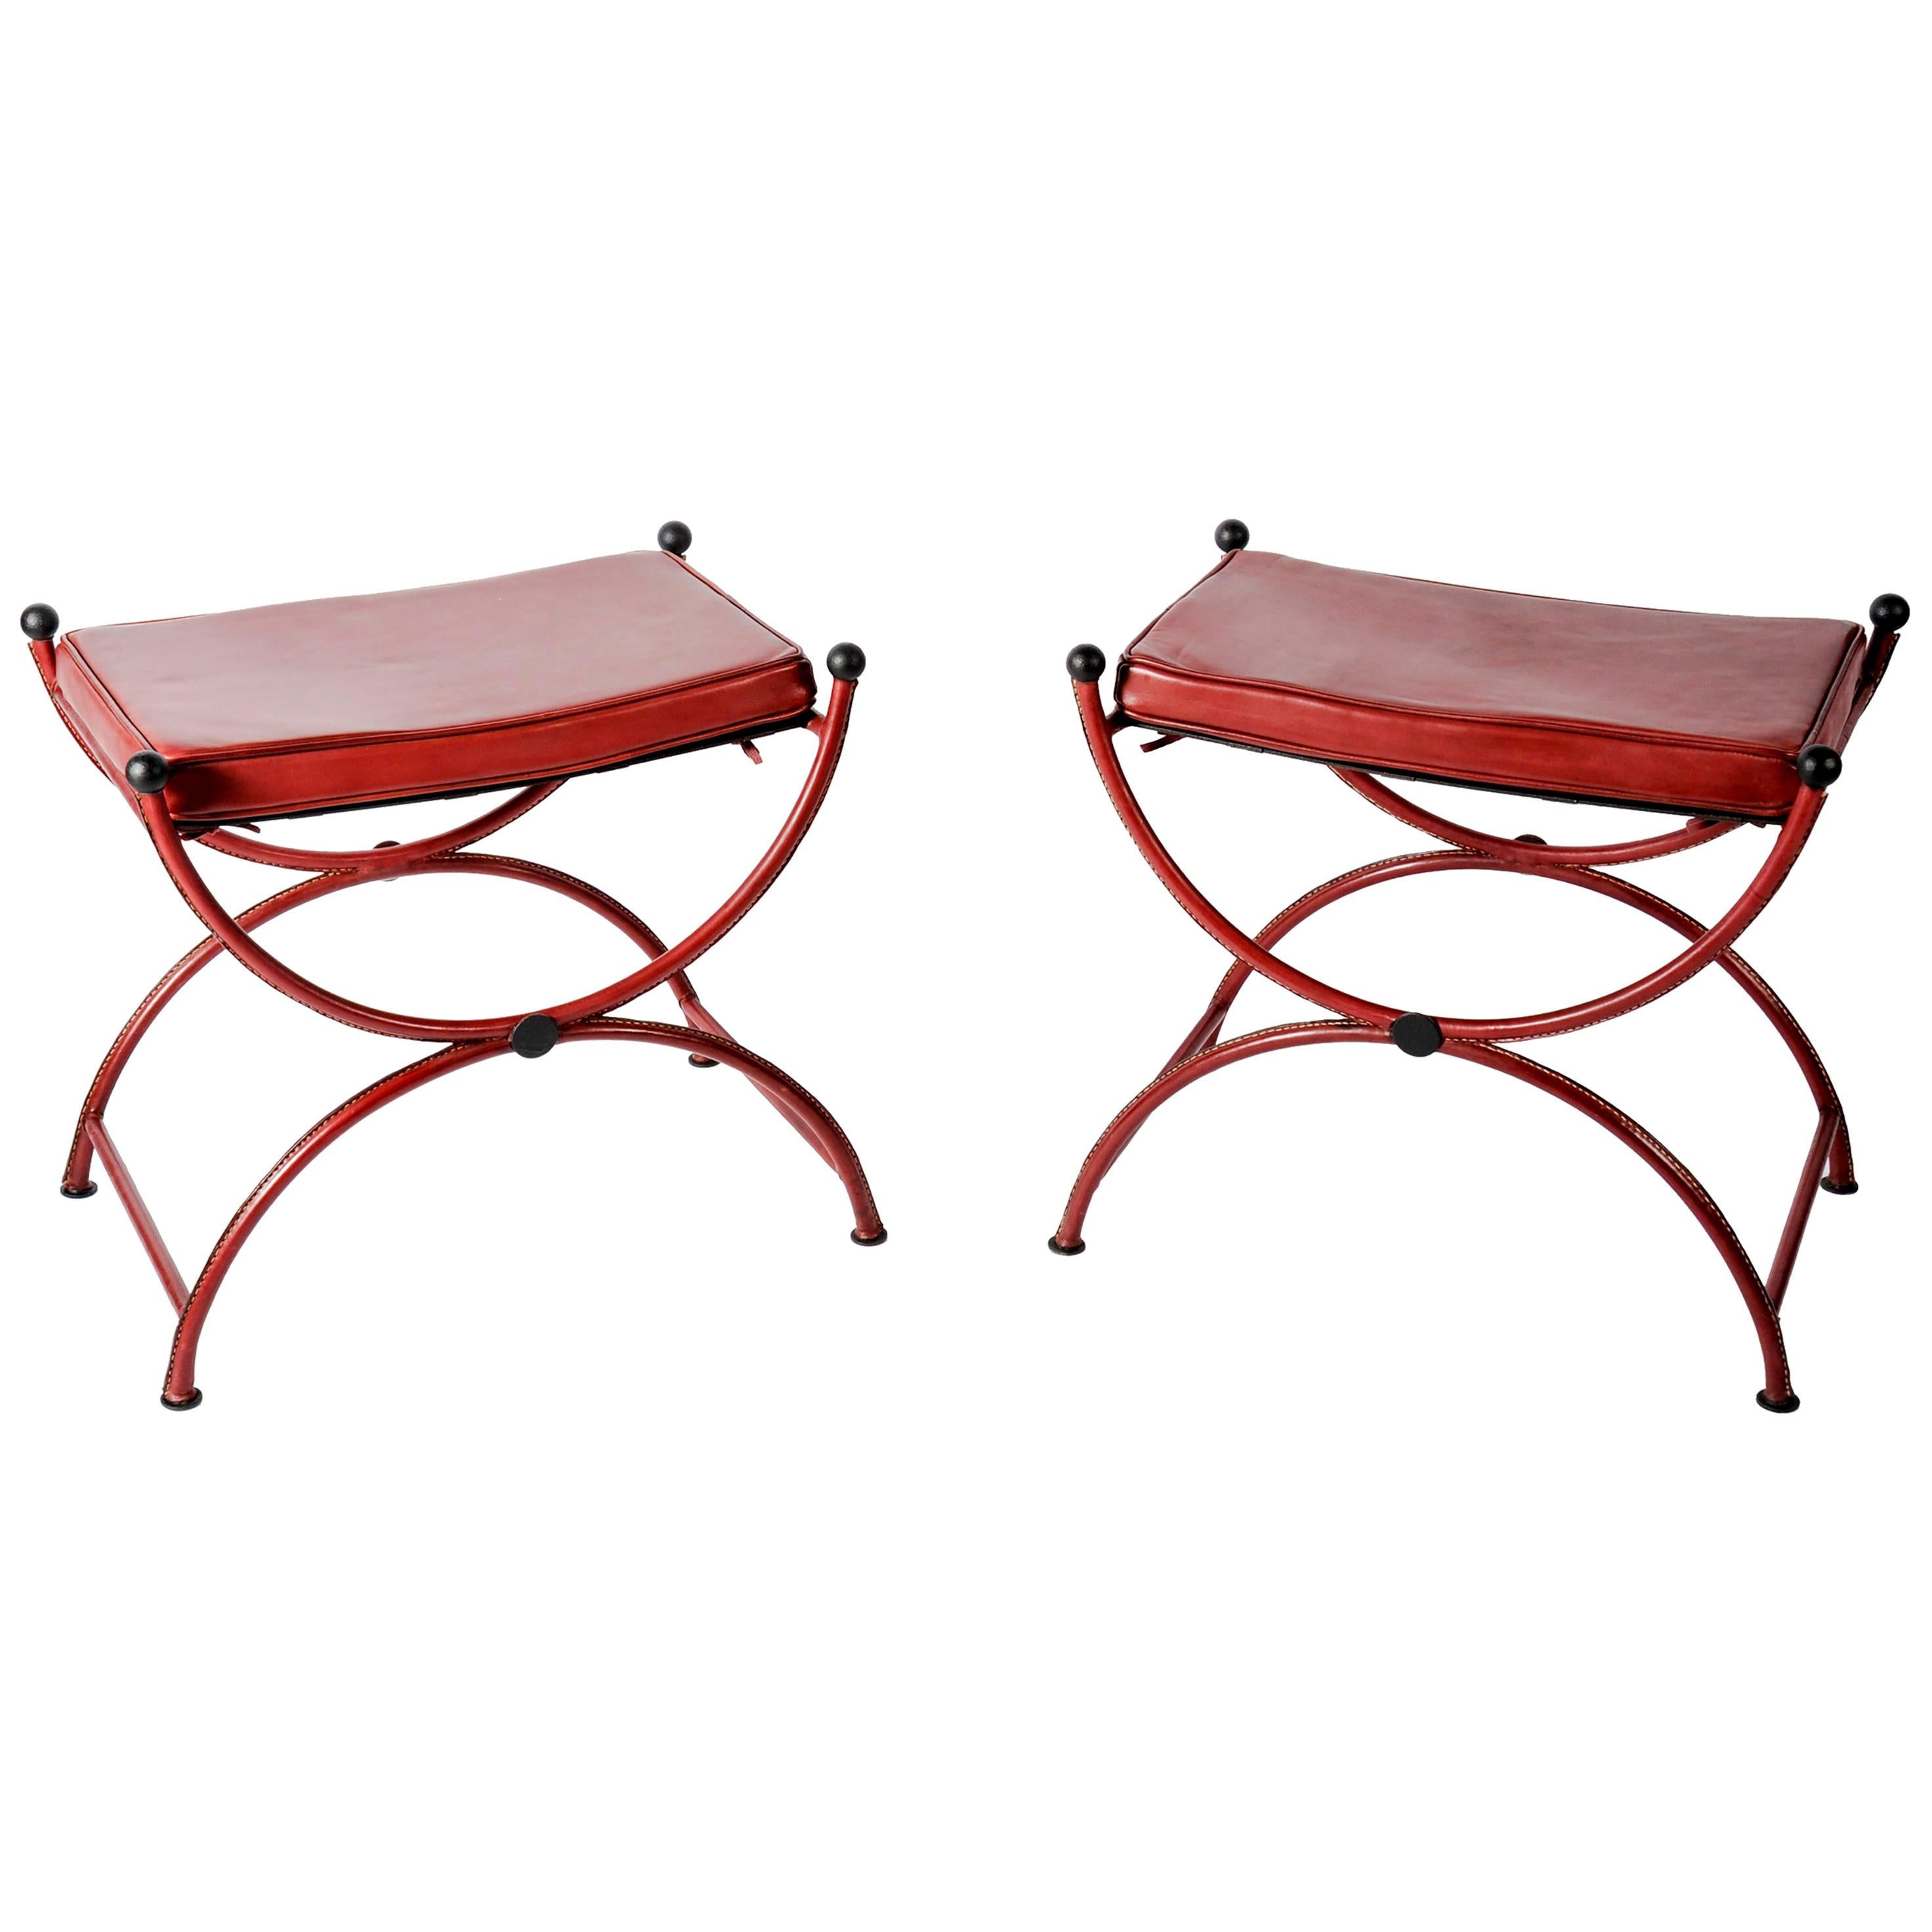 Pair of Neoclassical Stools in Stitched Leather by Jacques Adnet